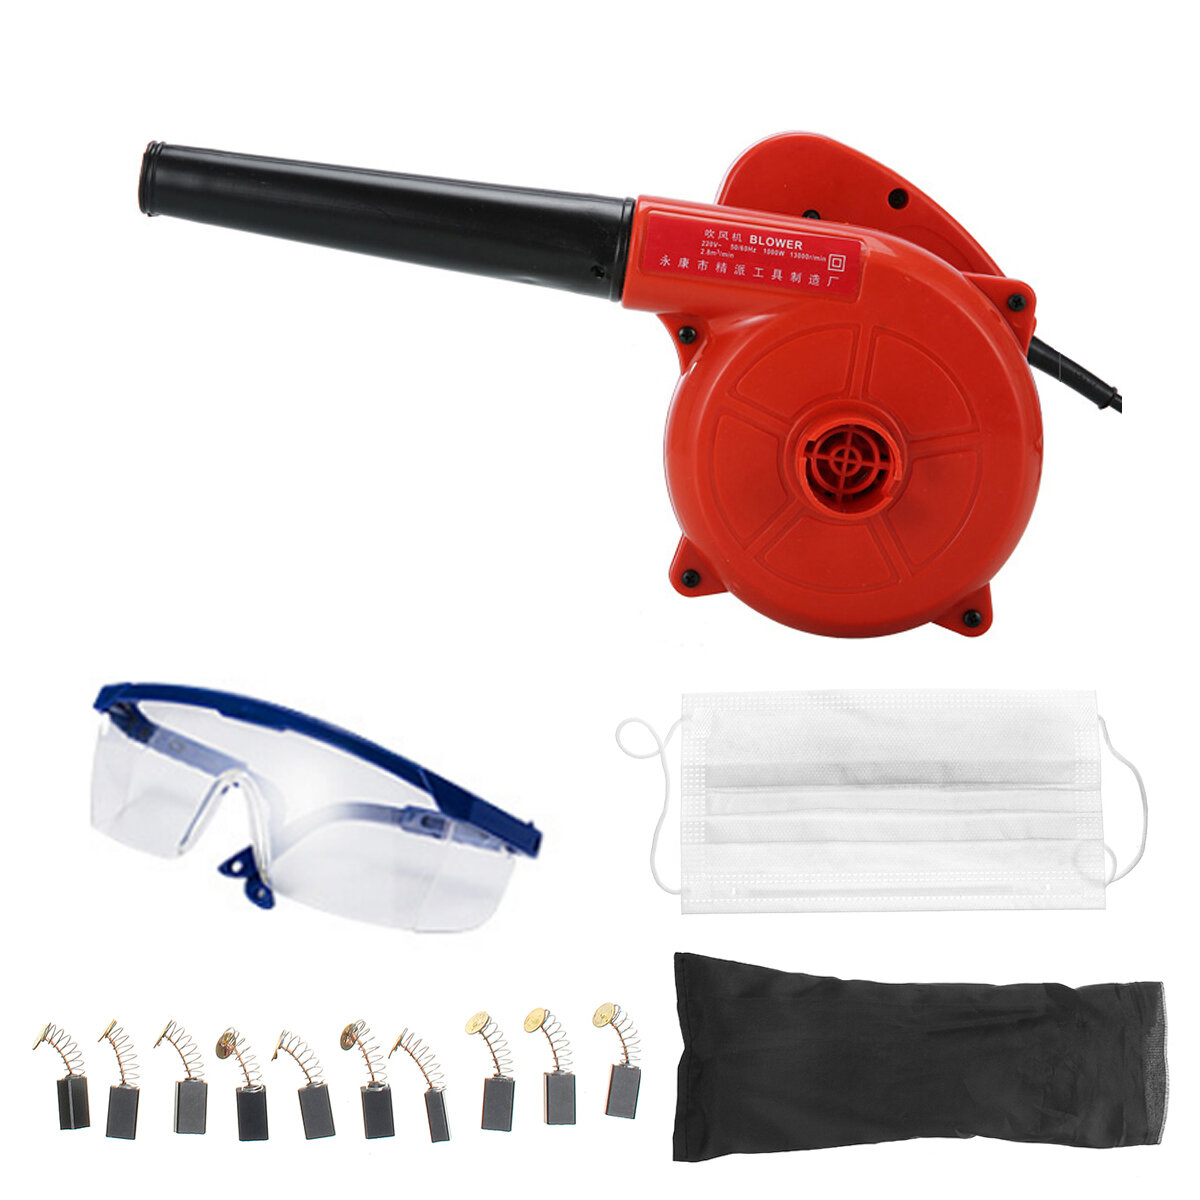 220V 500W Electric Air Blower Handheld Computer Cleaning Machine Home Car Dust Vacuum Cleaner W/ Mask & Goggles & 10pcs